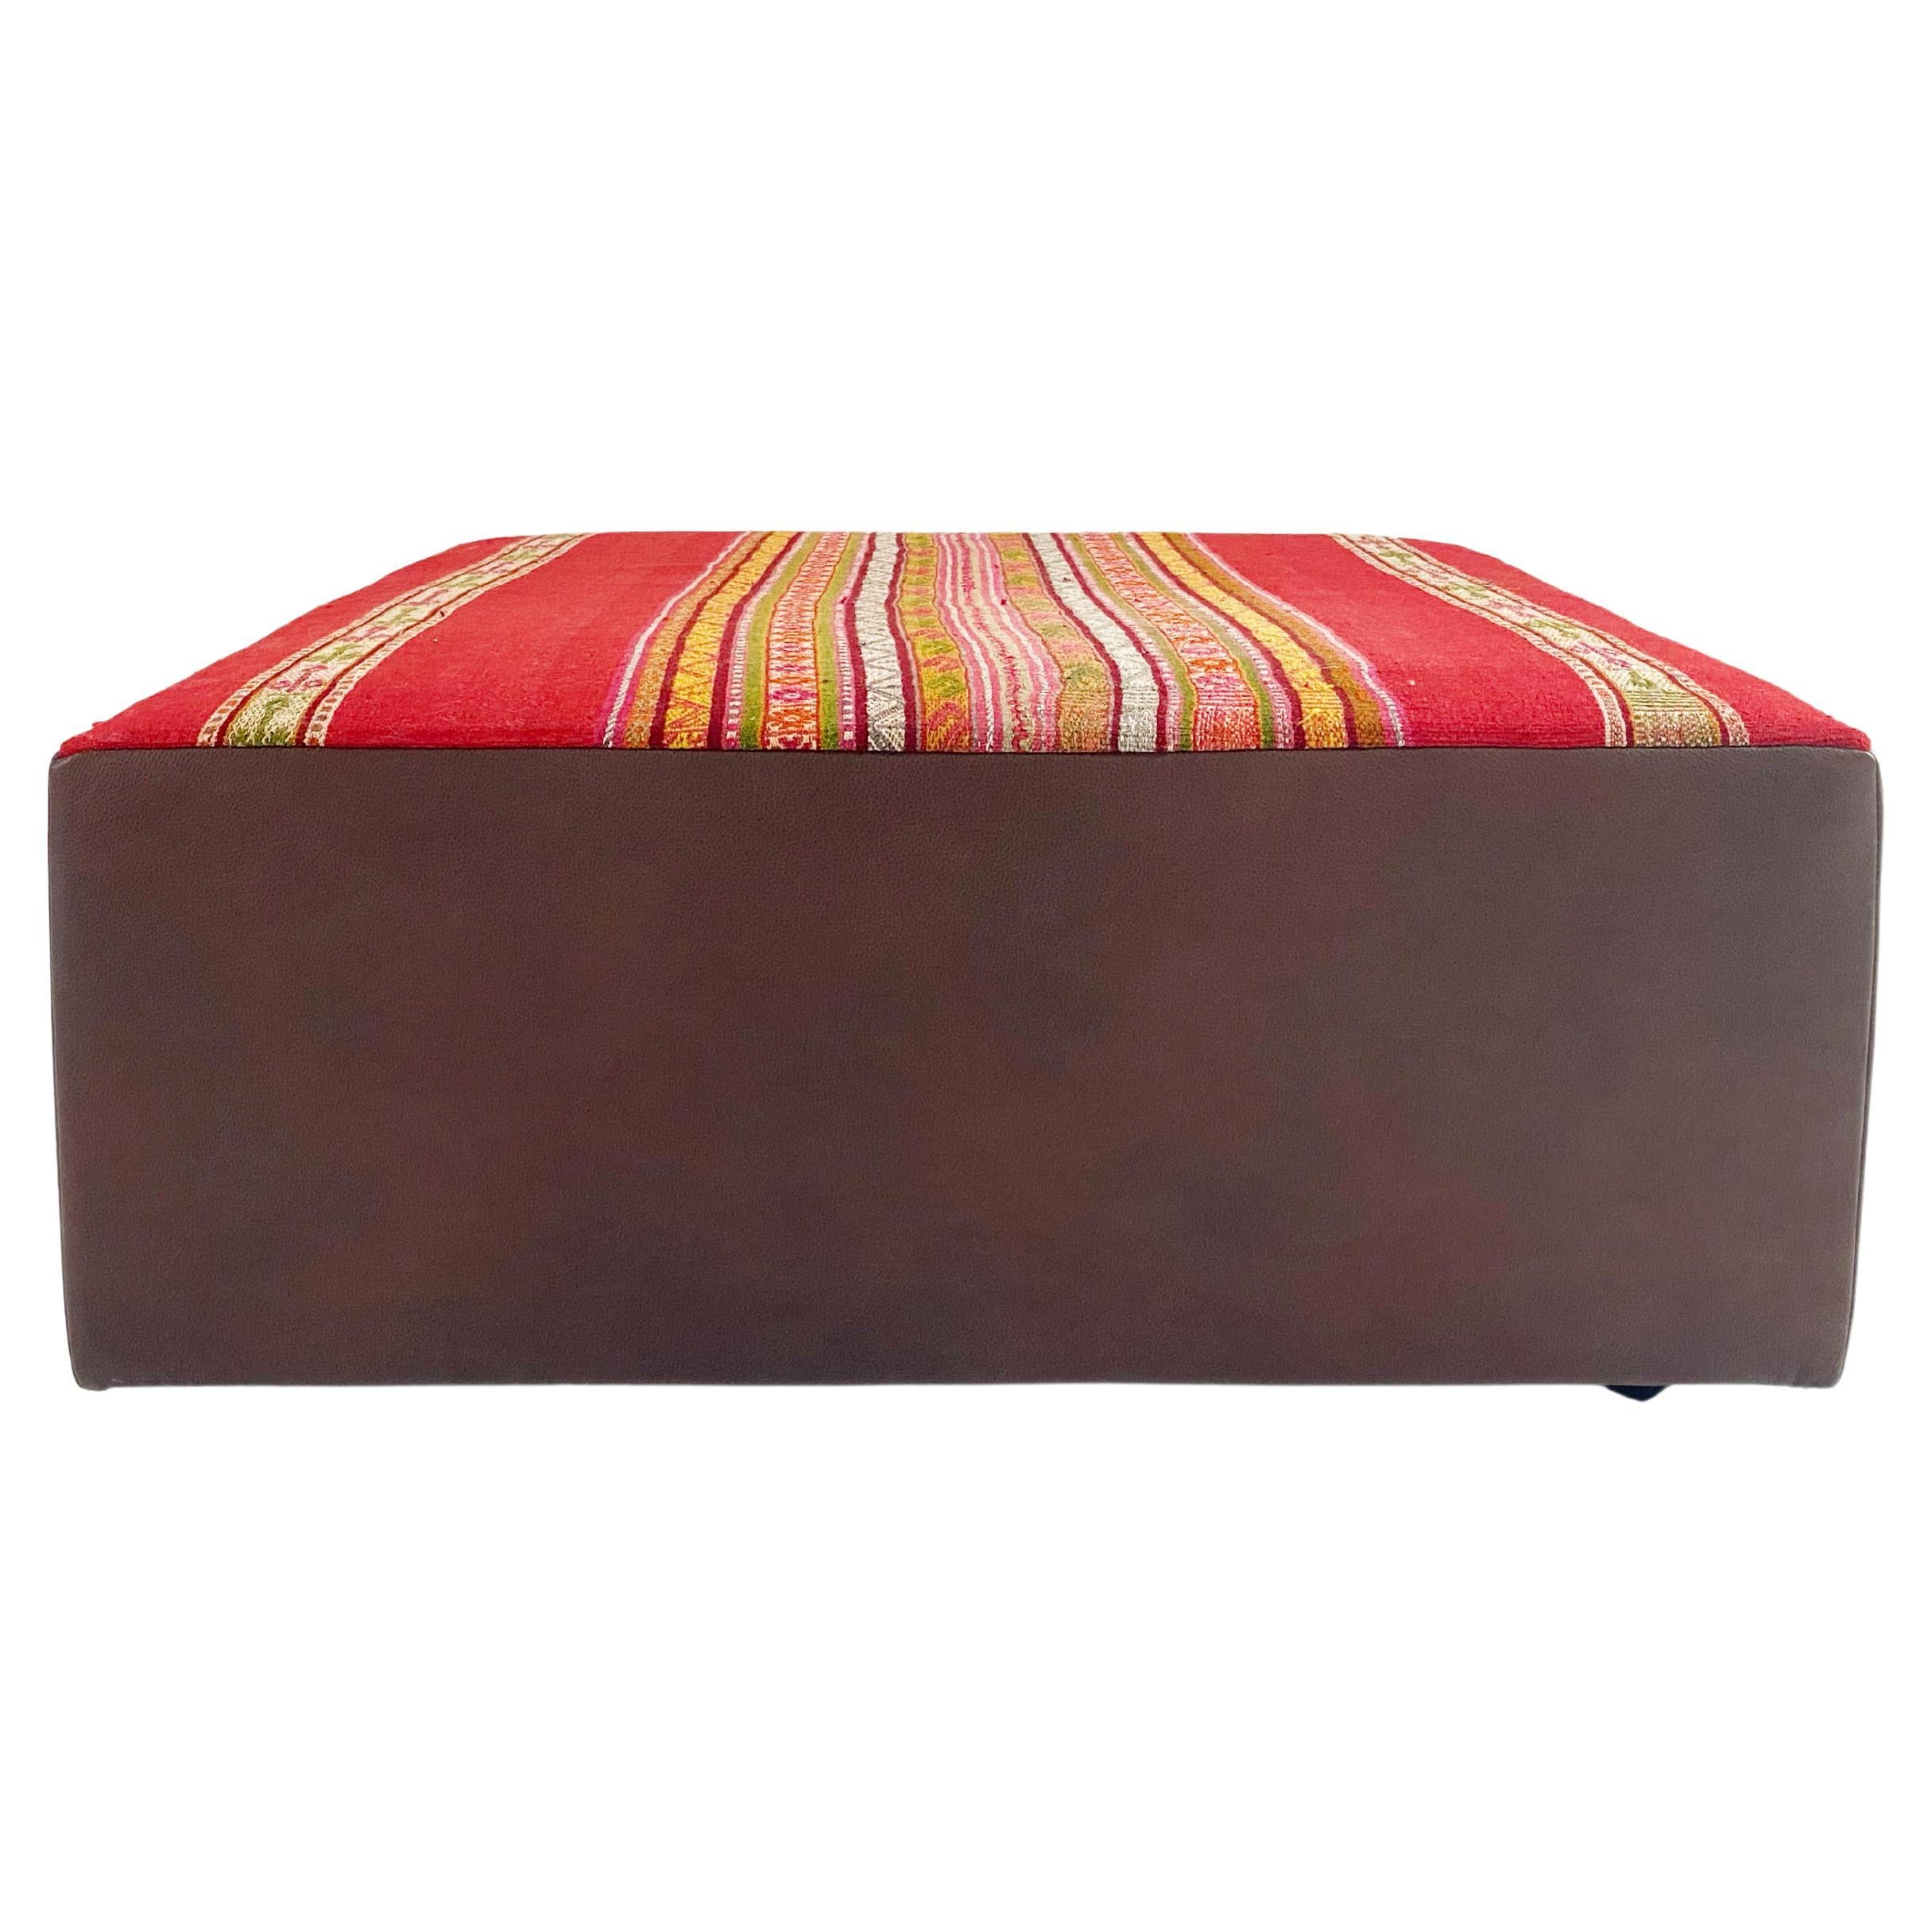 Forsyth One-of-a-kind Ottoman with Vintage Peruvian Textile, Red